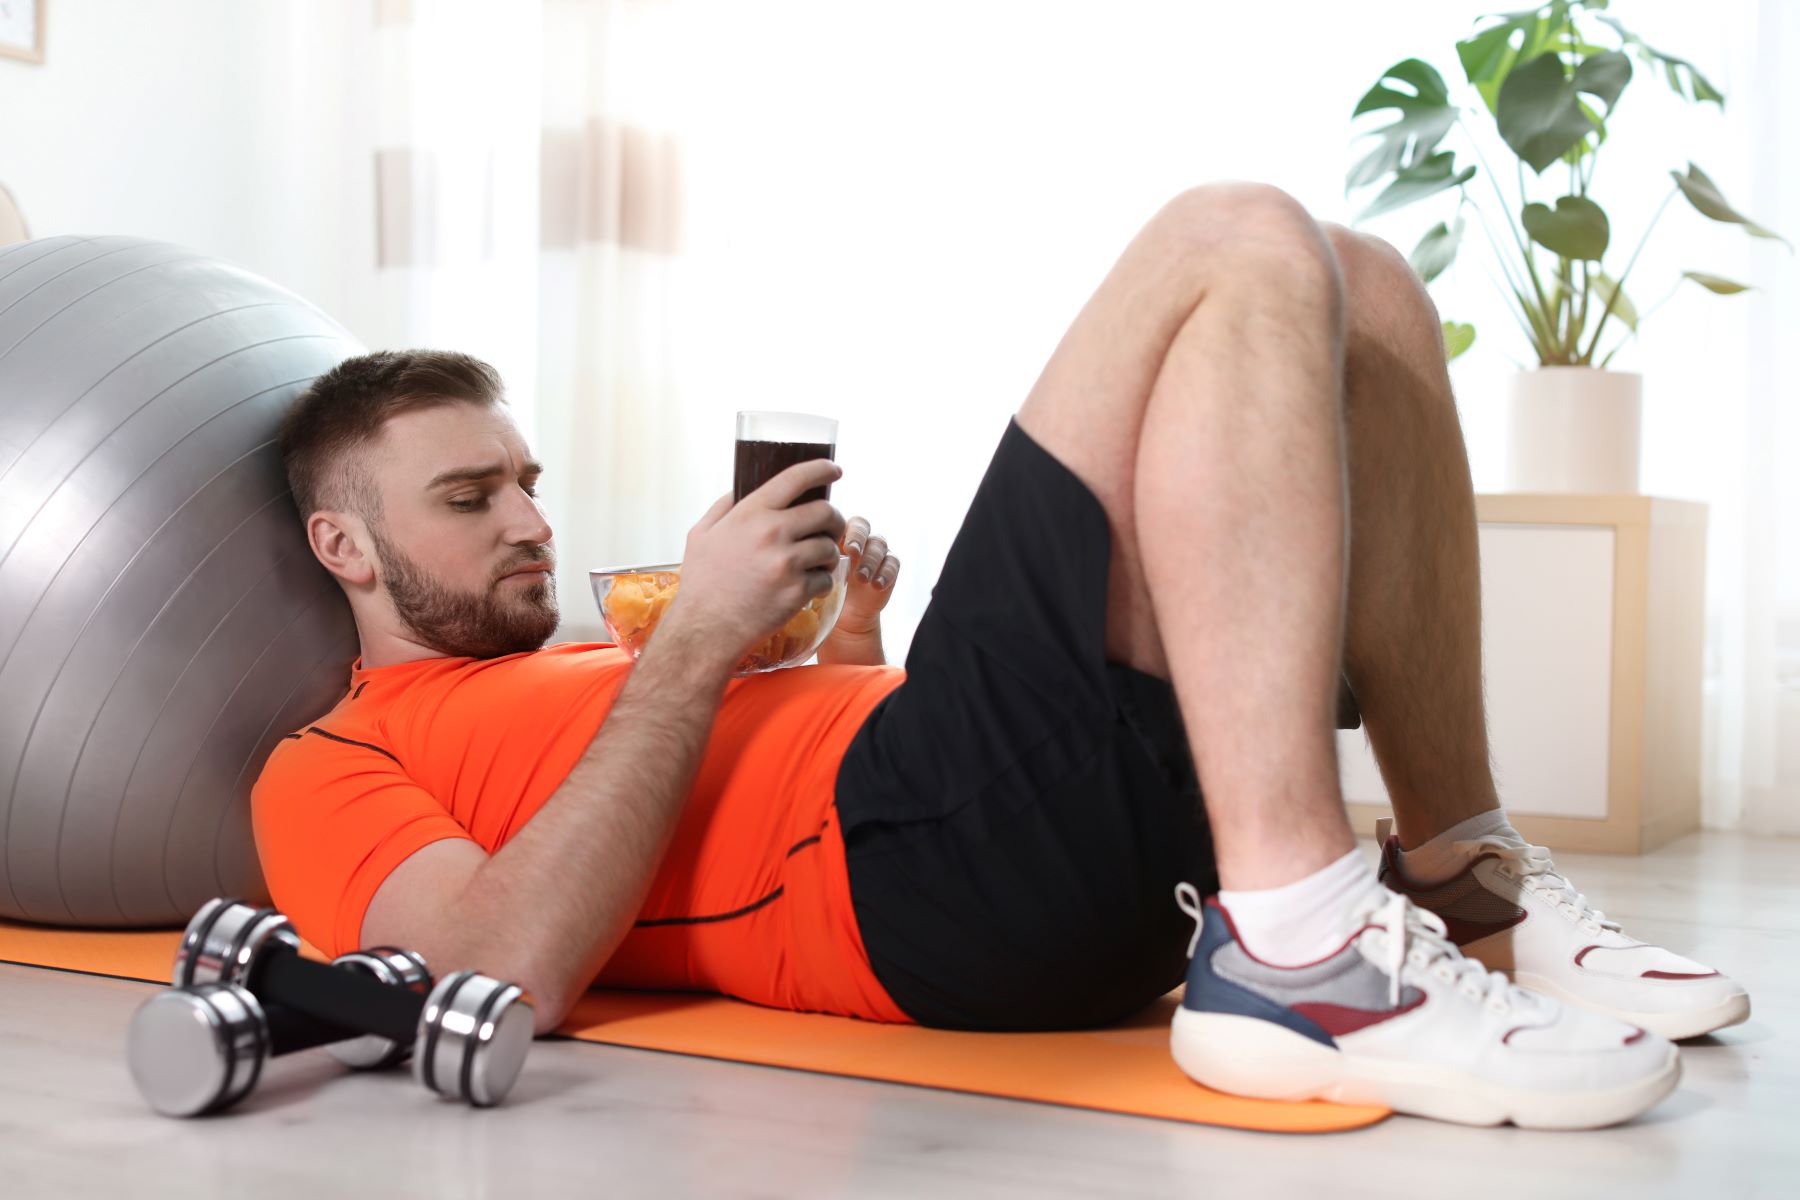 Man unmotivated to exercise